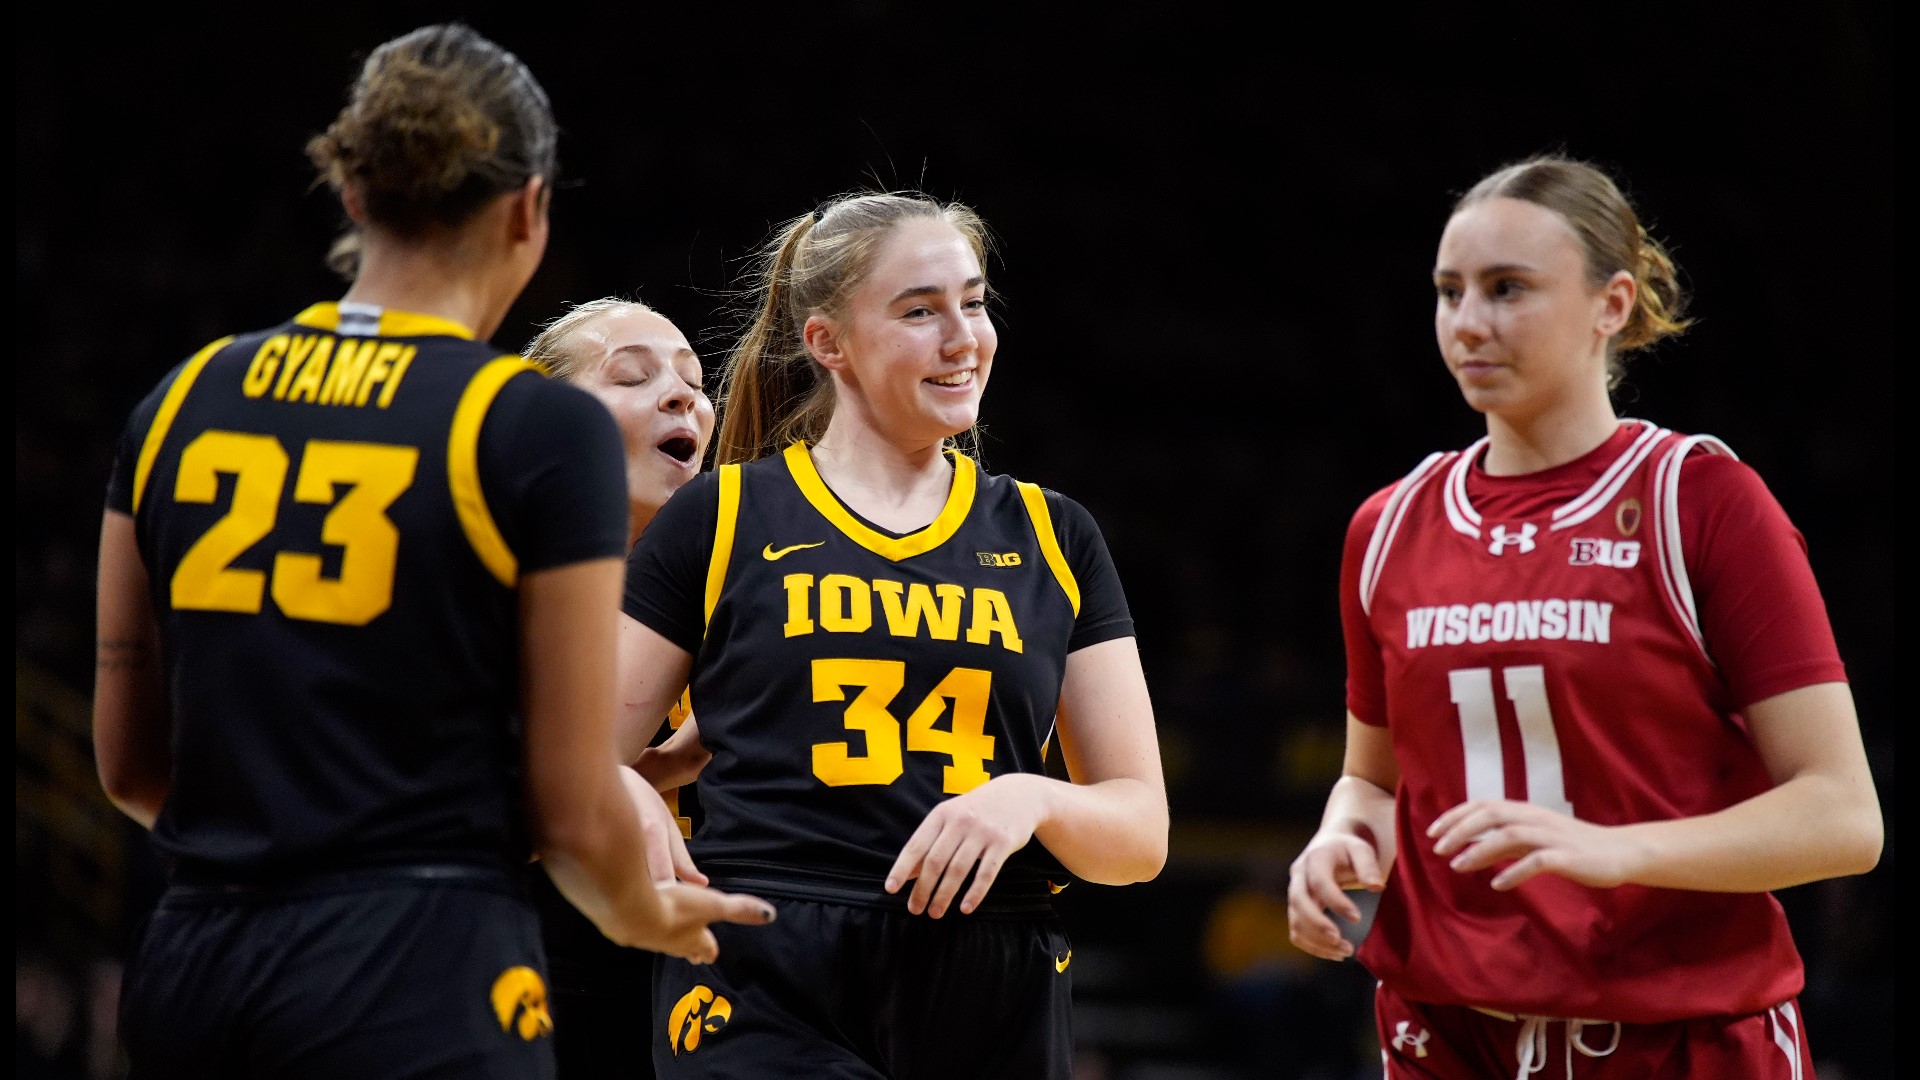 At Hamilton, she was the Caitlin Clark of the team. Ediger was the one hitting the shots for the Hawkeyes and eventually became the school's all-time leading scorer.